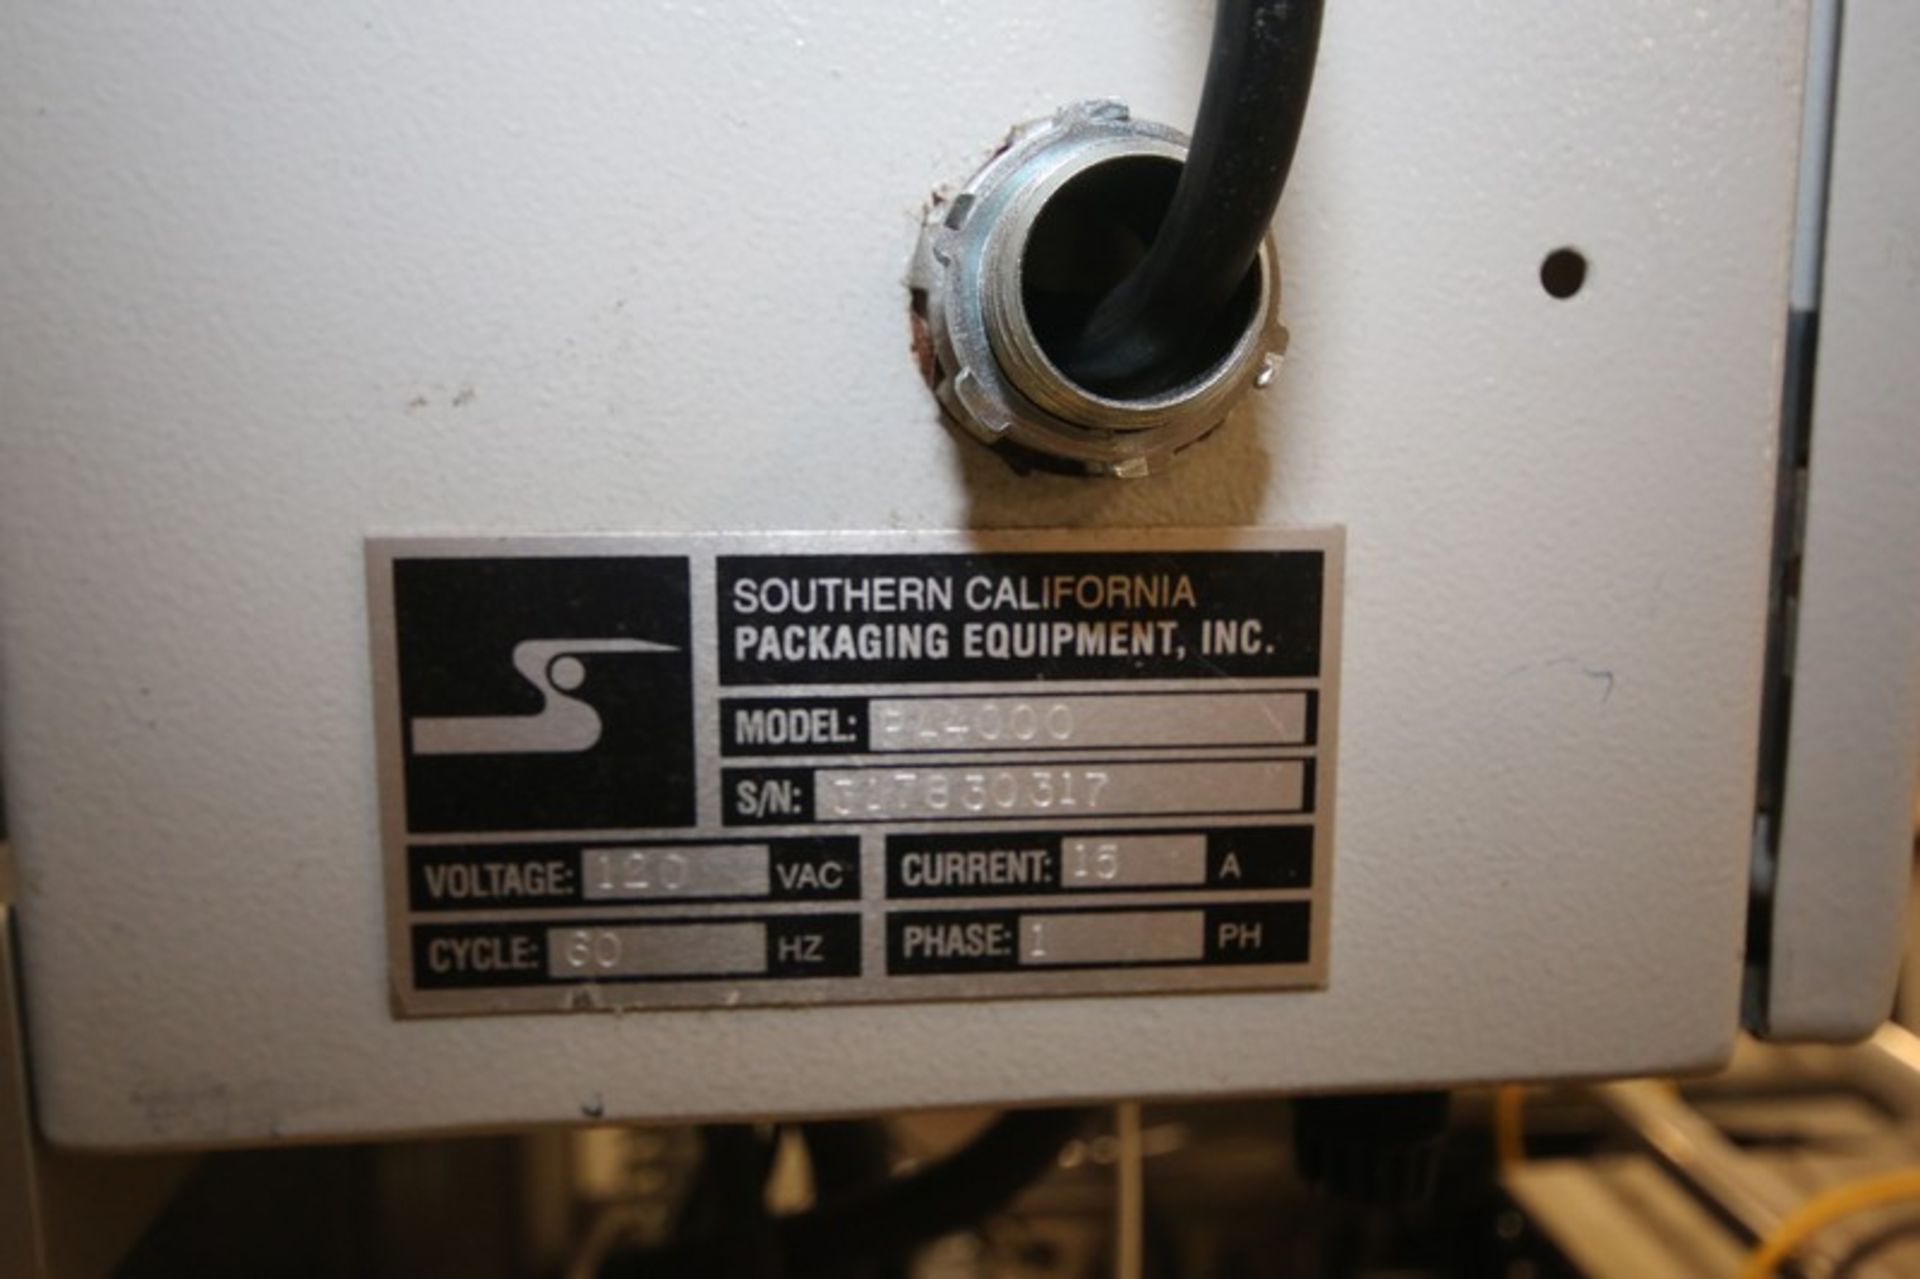 Southern California In-Line Labeler, Model PA4000, SN 317830317, with Sato S84ex Barcode Label - Image 12 of 12